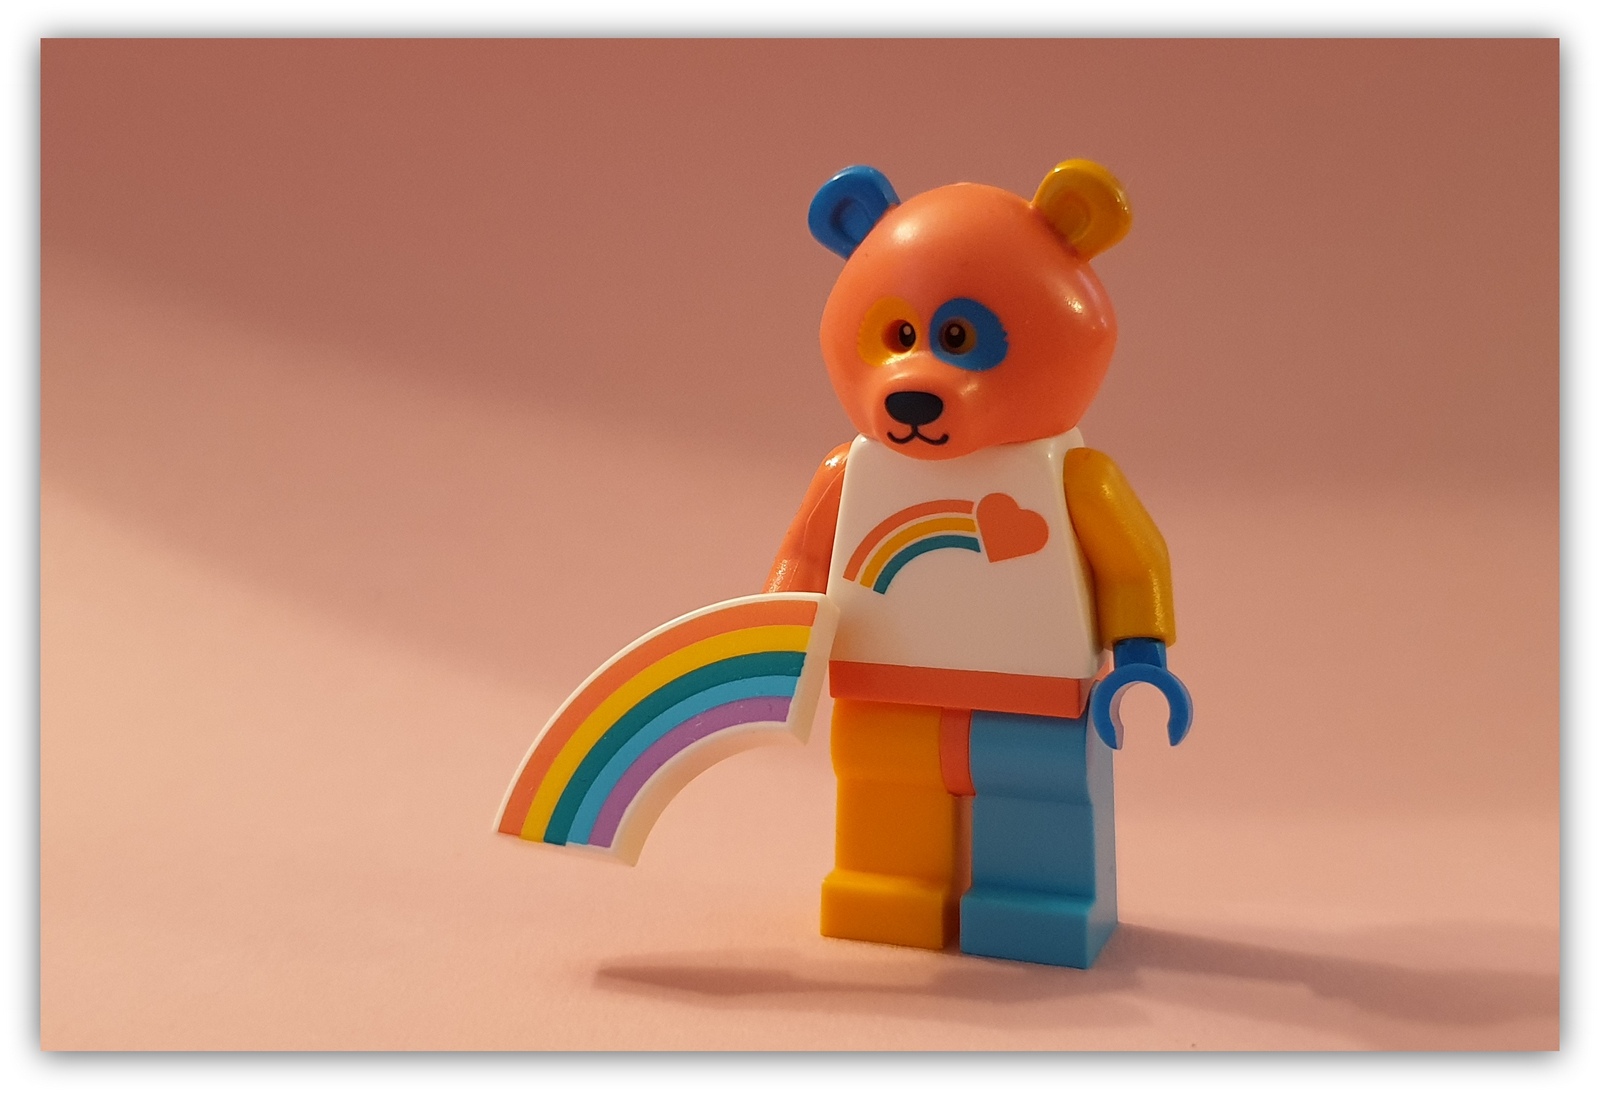 Able-ism and Diversity in LEGO Minifigures.com Blog